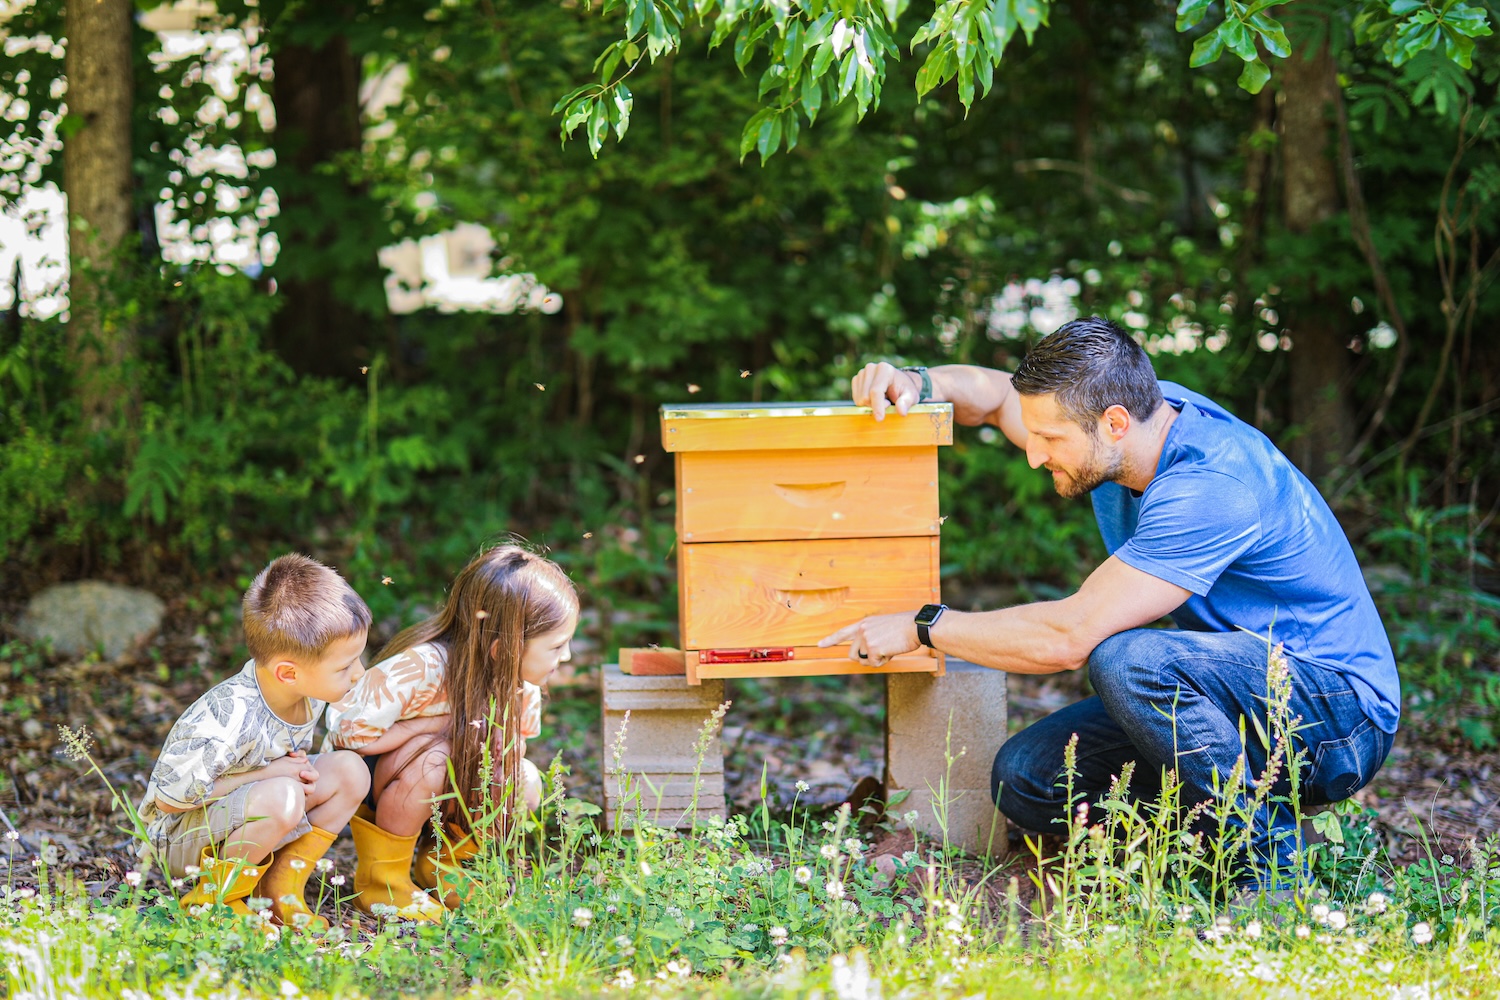 Michael and the kids inspecting a bee hive